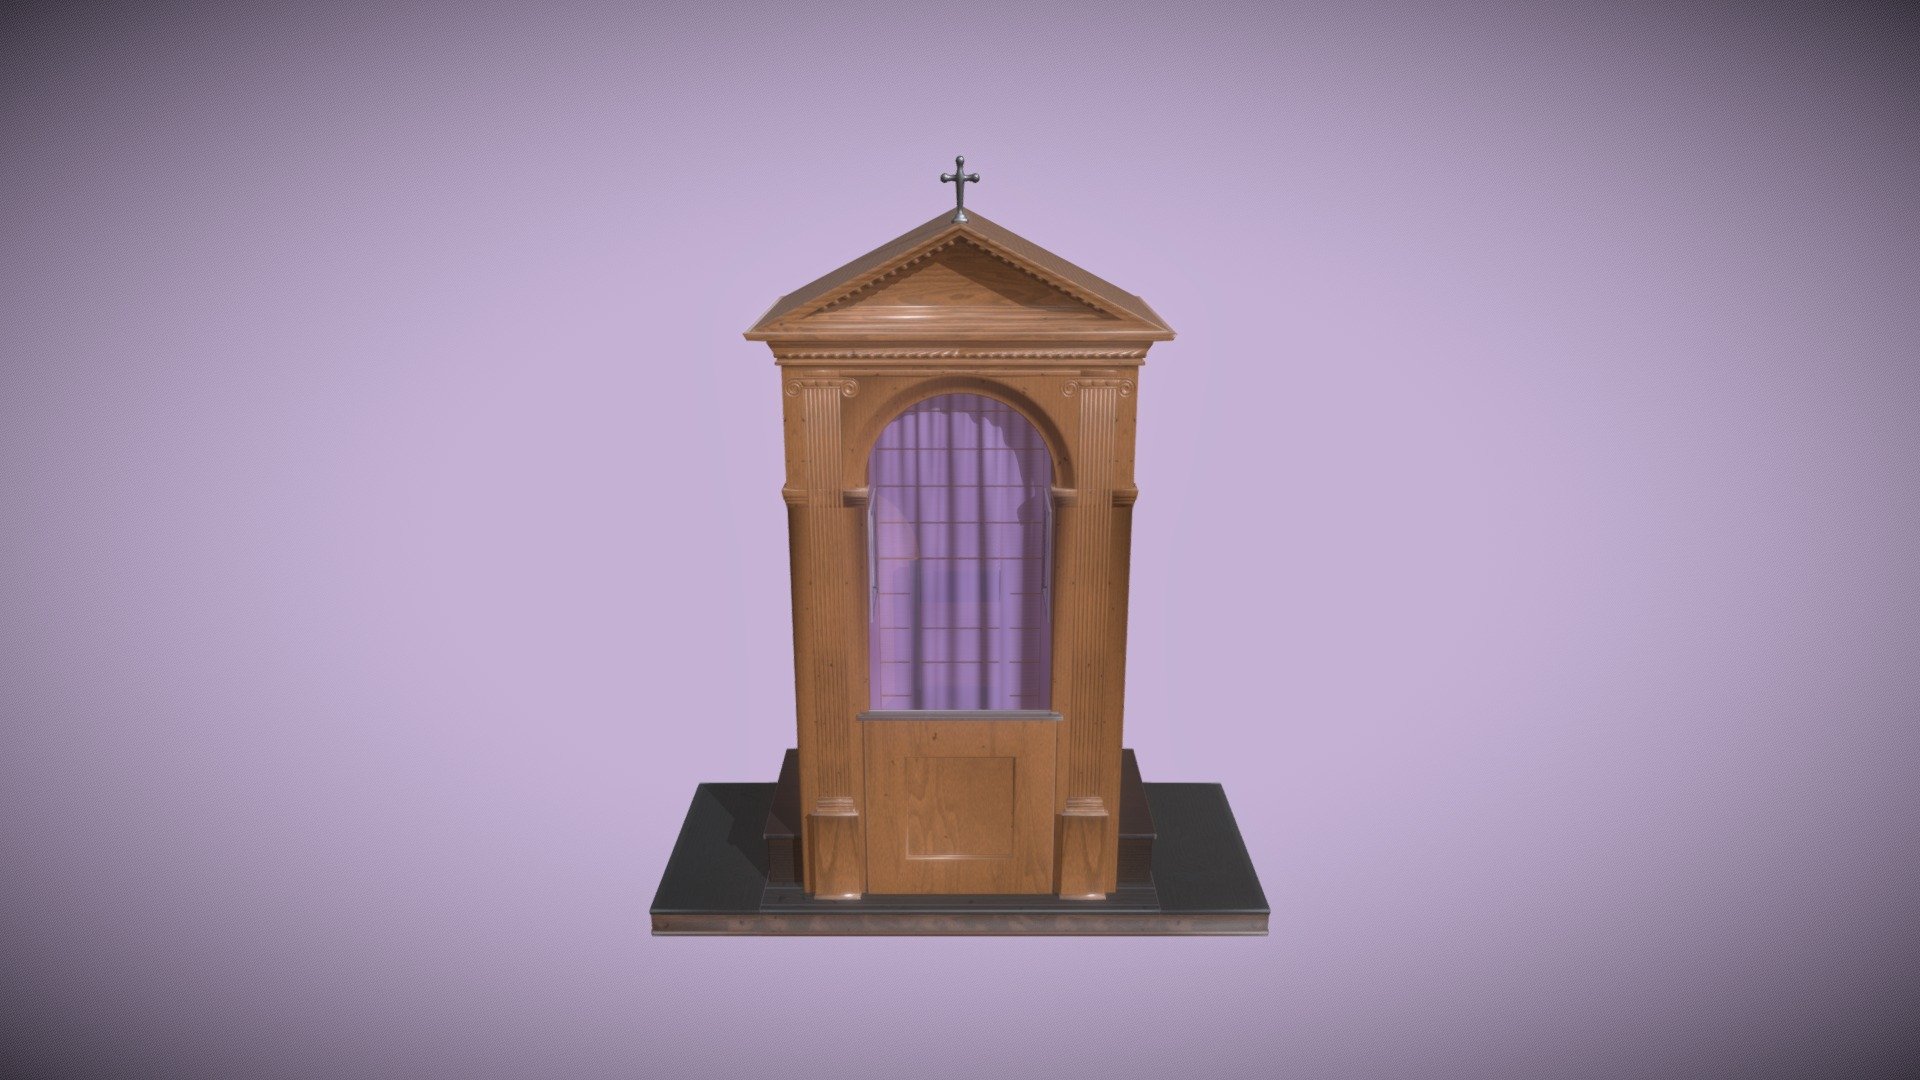 3D model of a confessional cabinet used for confession of penitents. 
Created in Blender 3.5.0.
The whole model is textured, with fully unwrapped UVs. 4096x4096 PNG texture maps are provided (color, roughness, normal, specular, metallic, alpha).
The model consists of 15922 faces and 18507 vertices 3d model